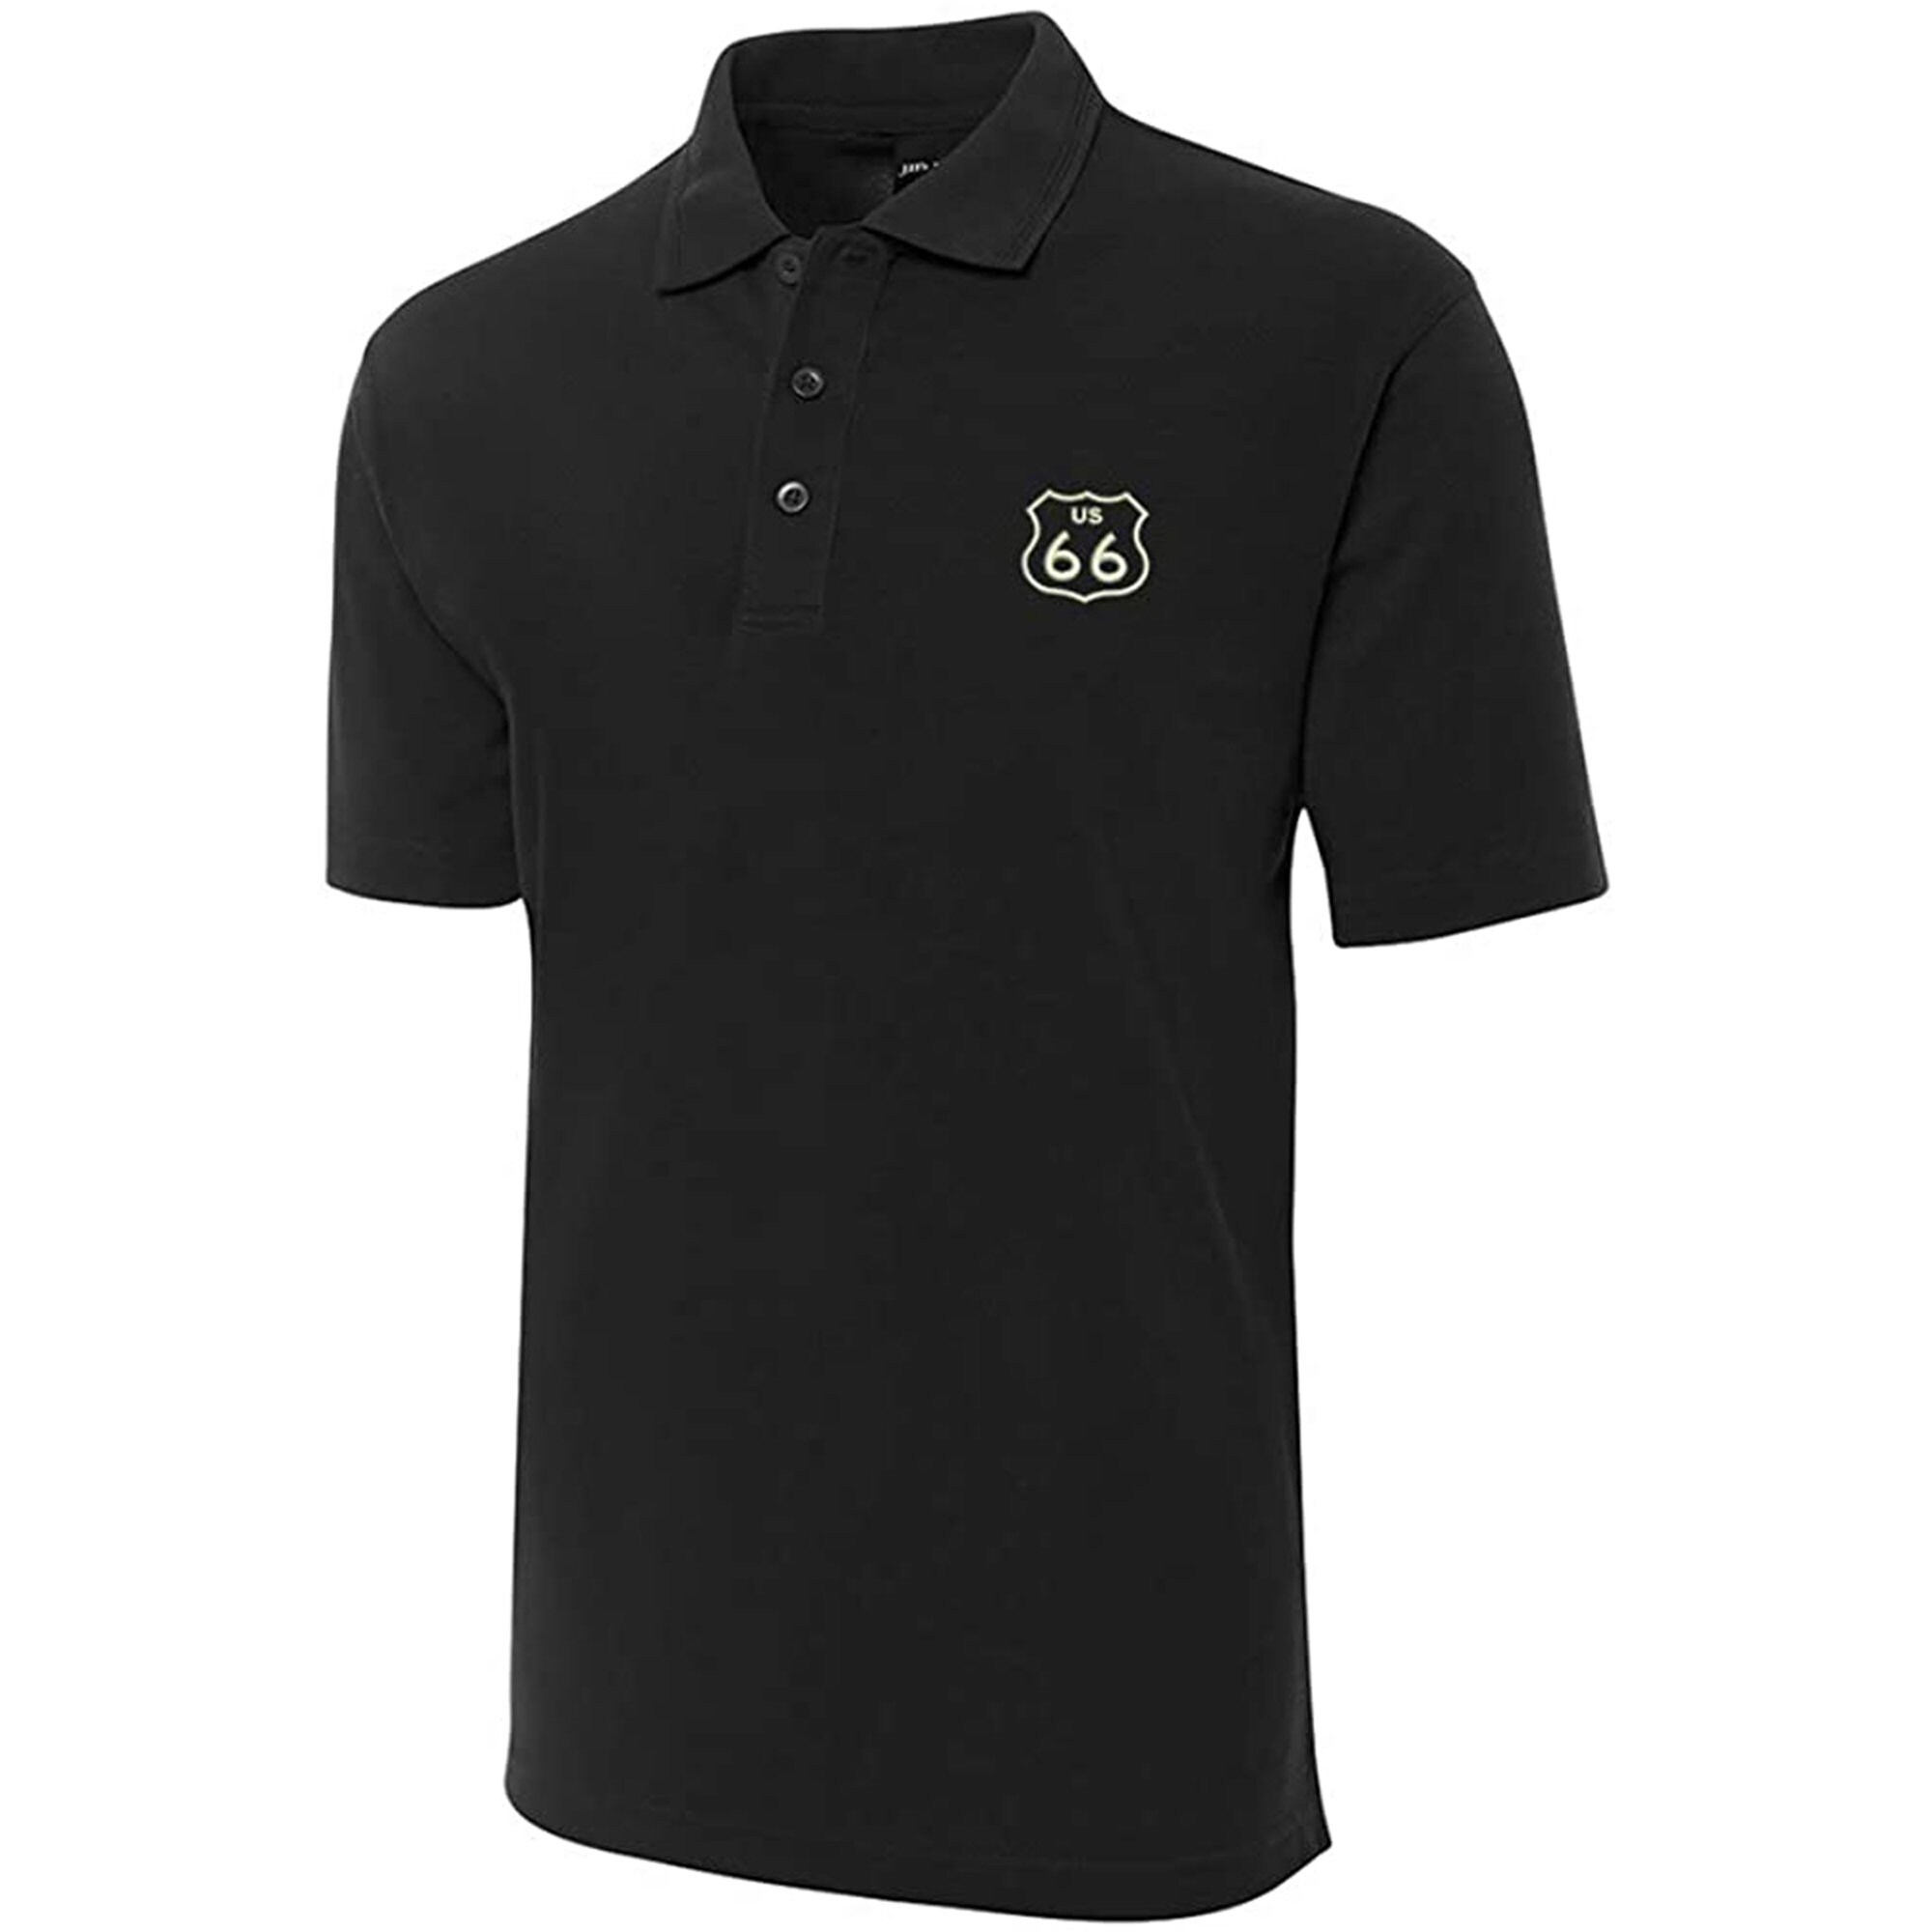 Route 66 Highway Embroidered Short Sleeve Polo Shirts Classic Embroidery Men's Polo Shirt